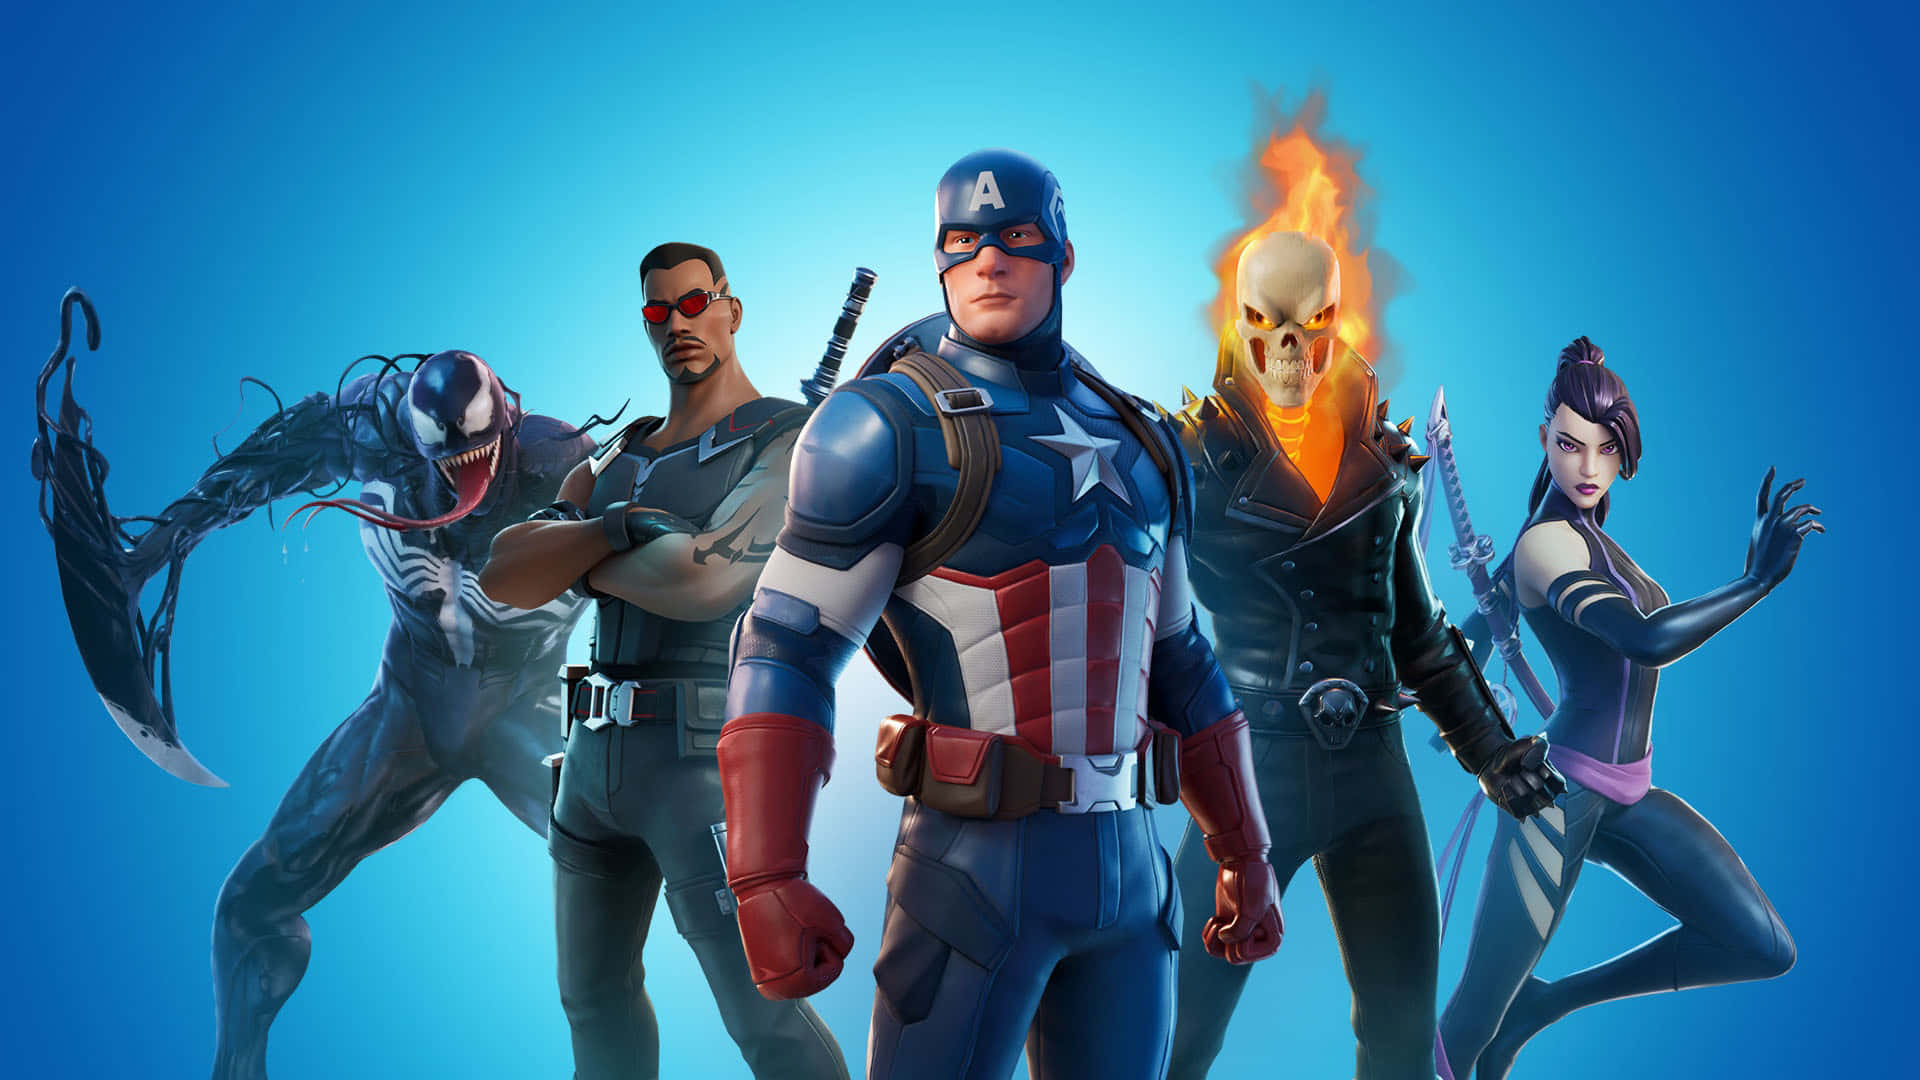 Marvel's superheroes unite to save the world Wallpaper